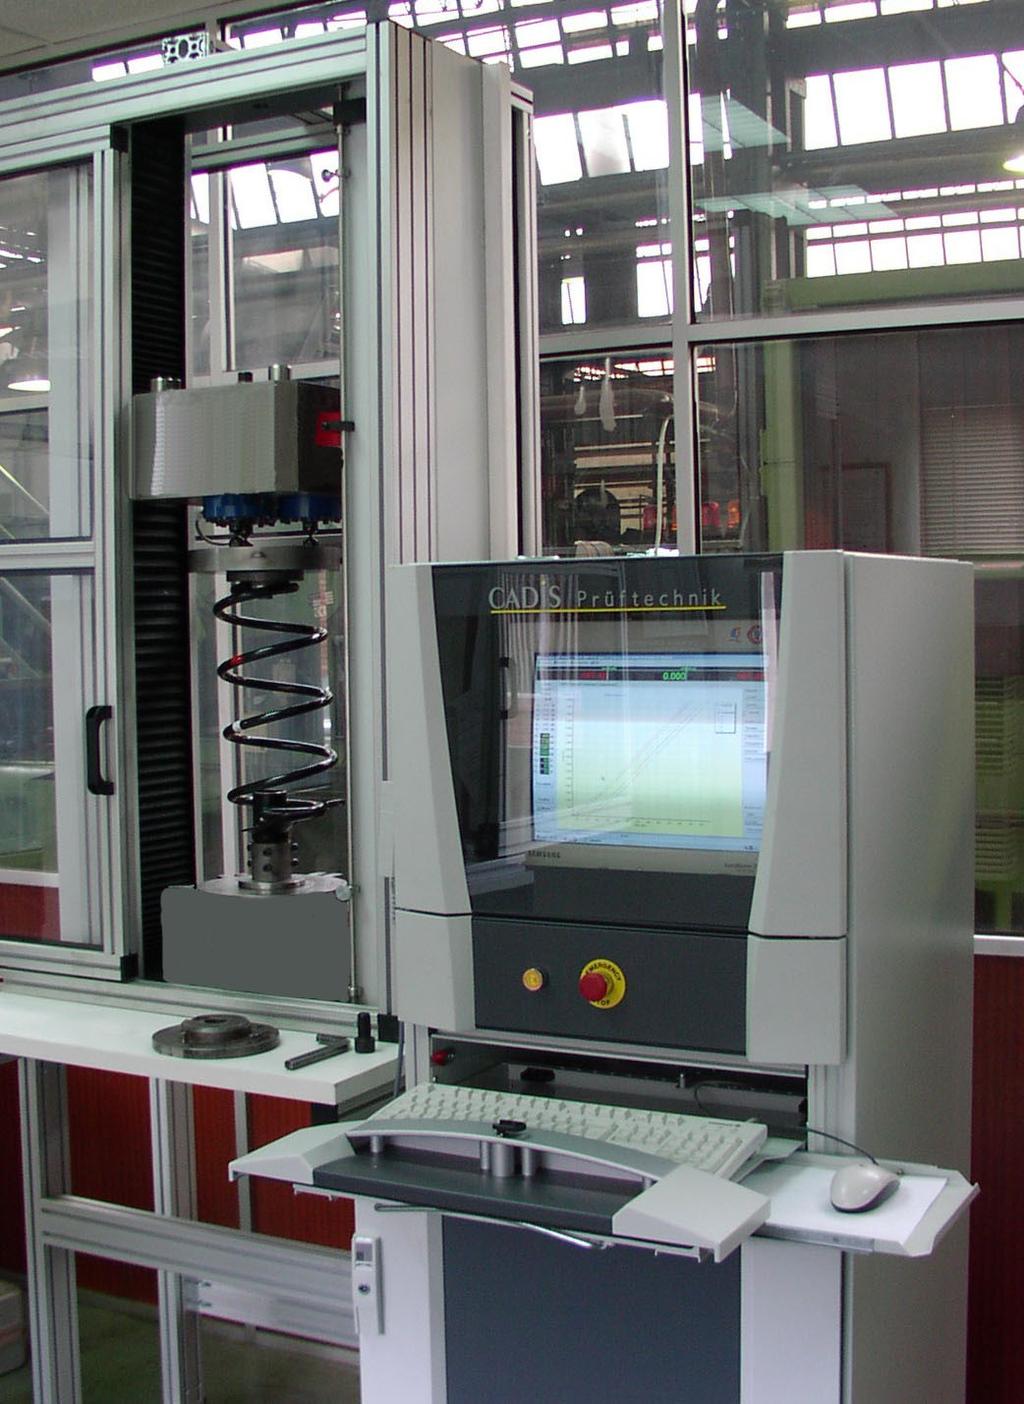 Spring testing machine 81870 Midrange series of testing machines from 10 to 50kN in two or four column design.